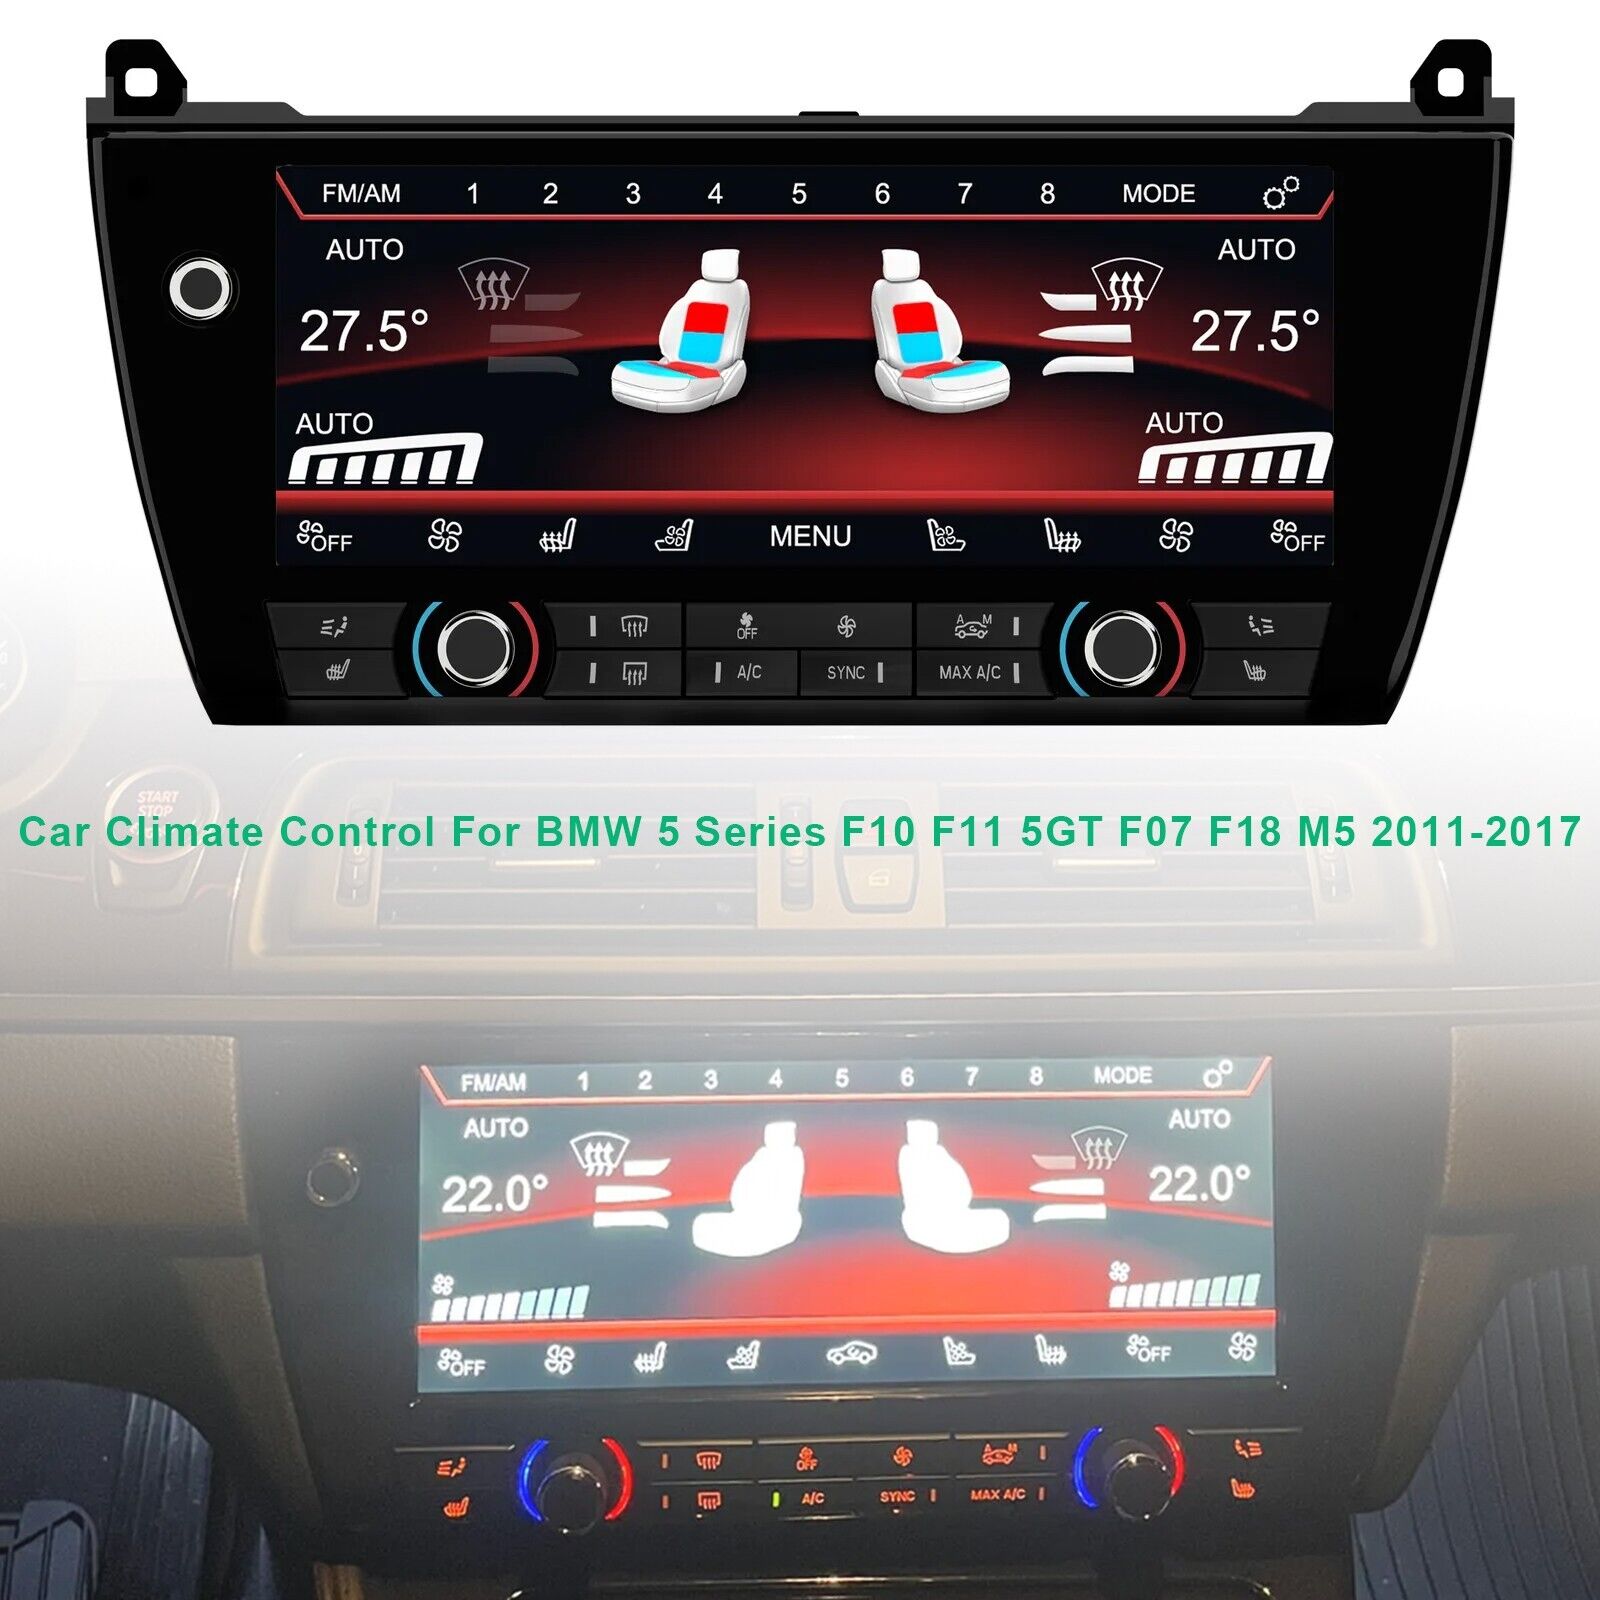 Car Climate Control Touch Screen For BMW 5 Series F10 F11 5GT F07 F18 M5 2011-17